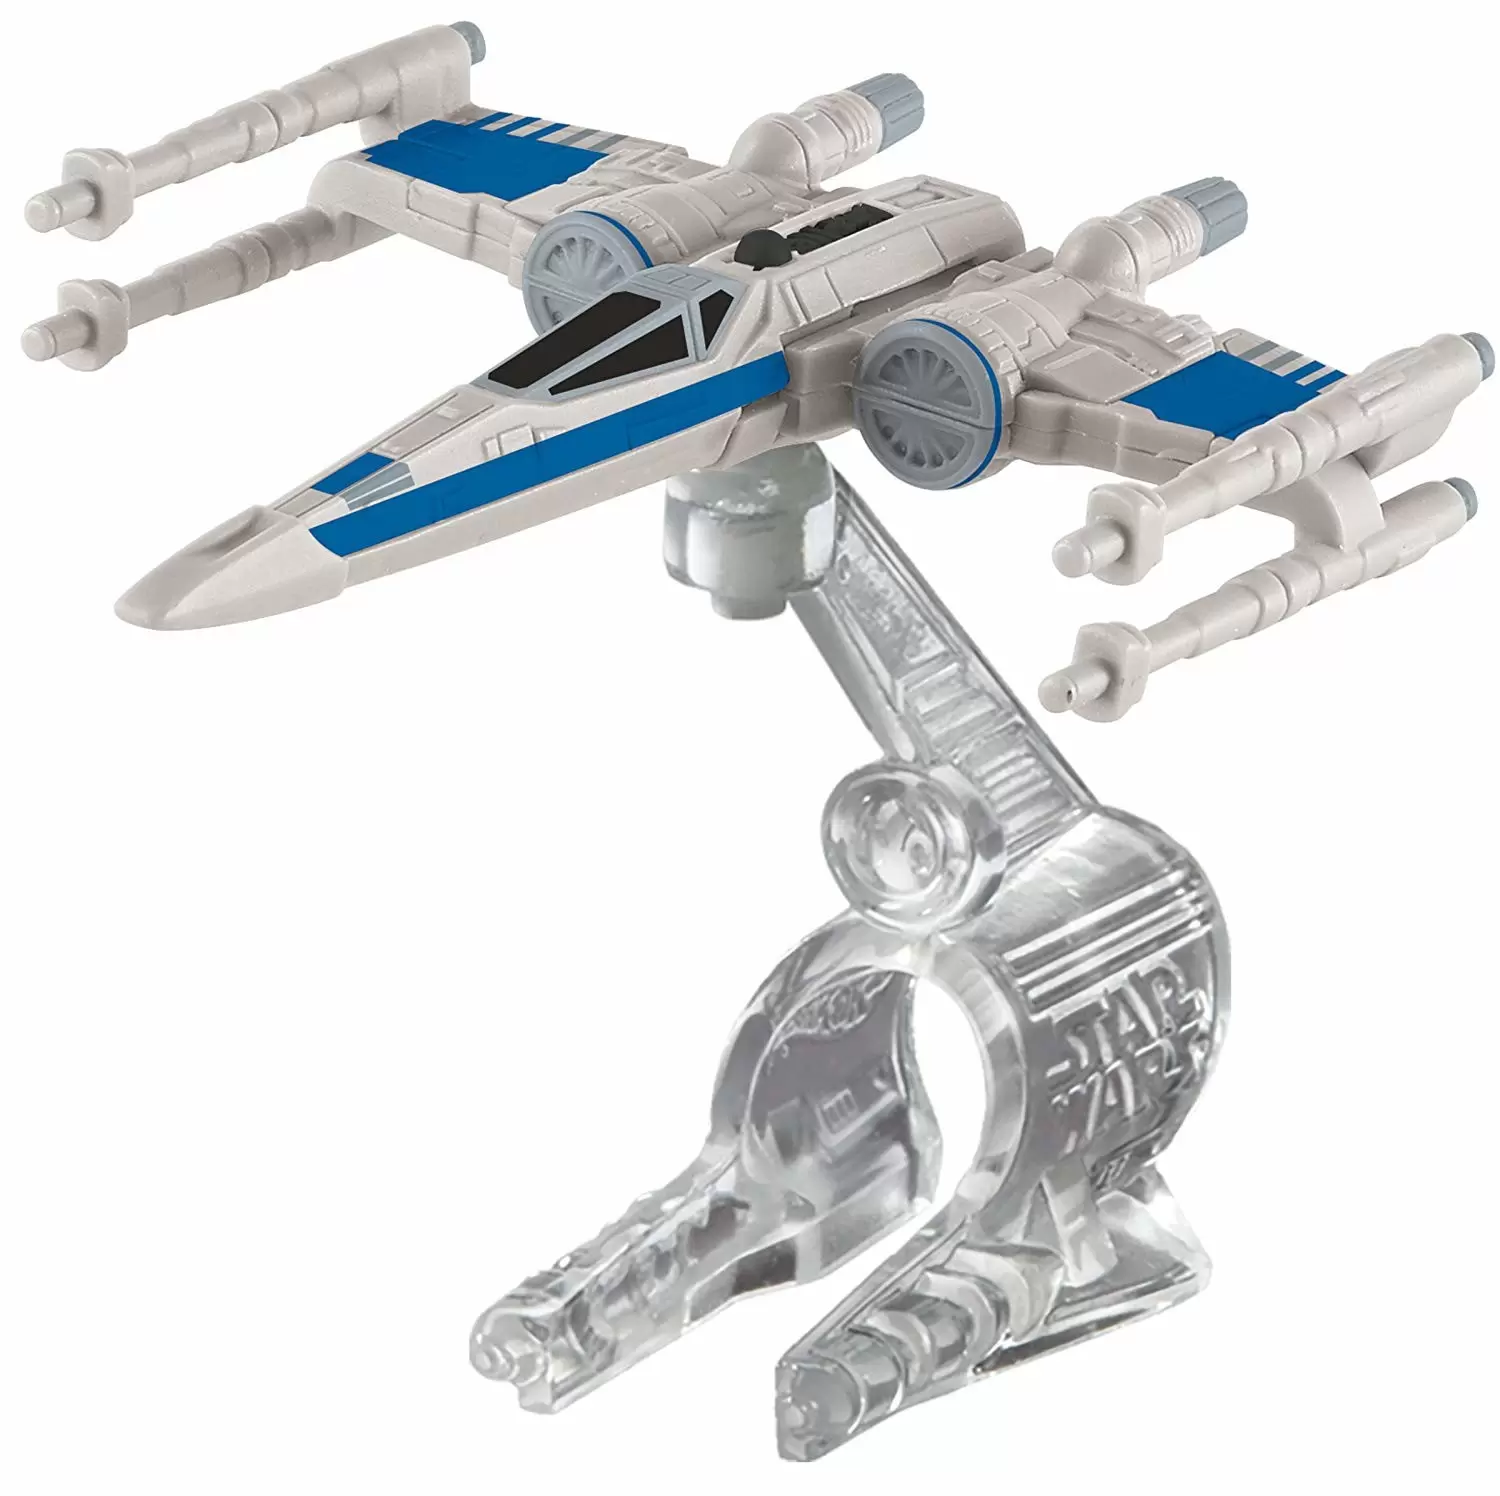 Die Cast Vehicle - Hot Wheels Star Wars - X-Wing Fighter Blue Squadron